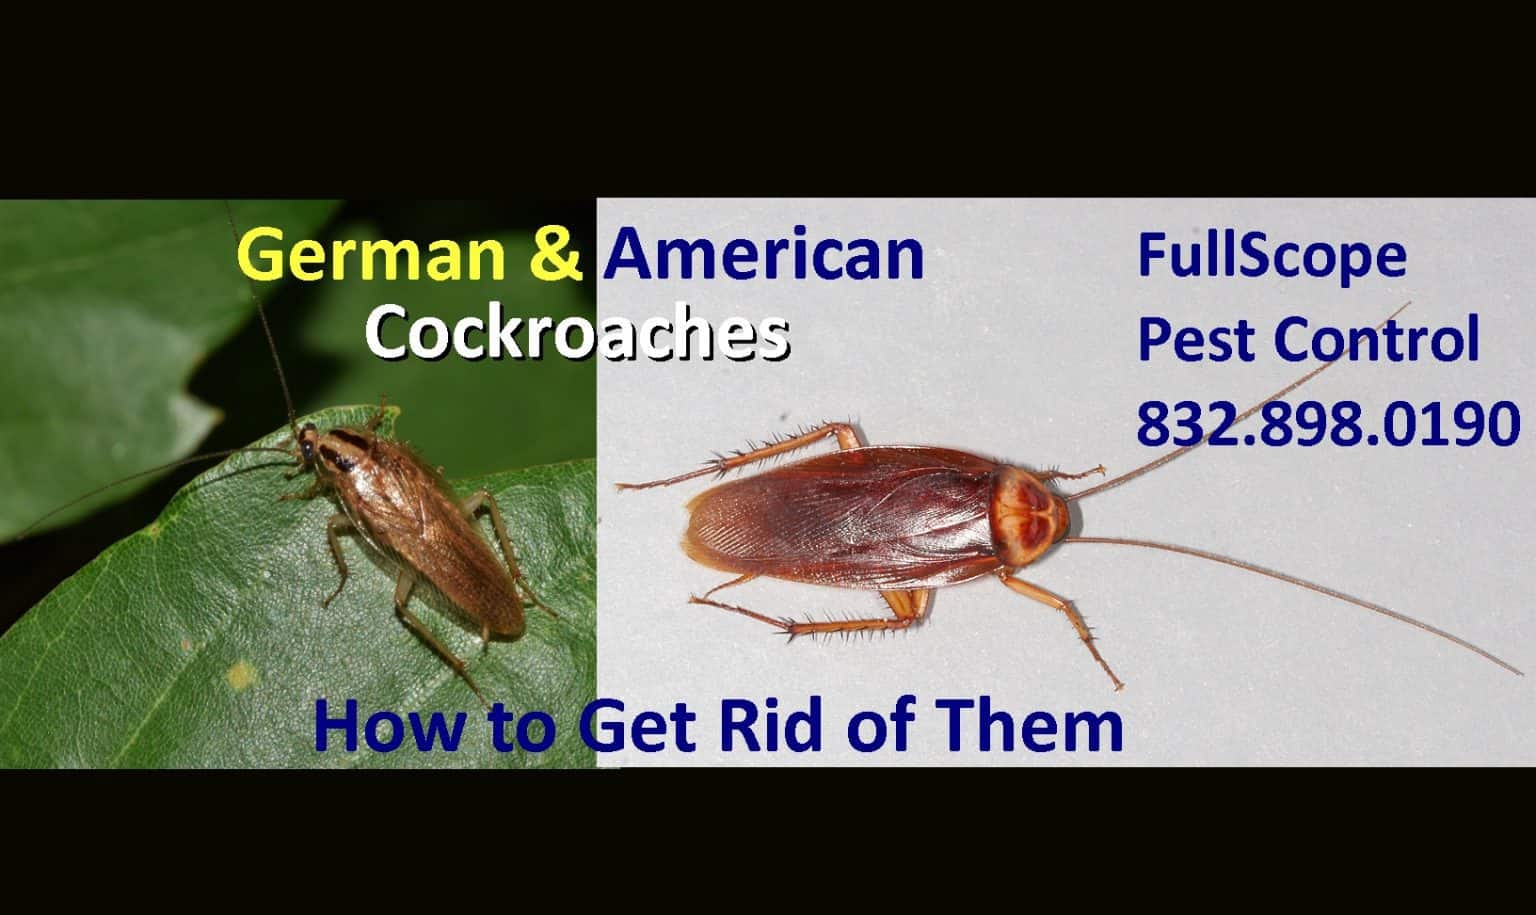 get-rid-of-german-and-american-cockroaches--1536x915